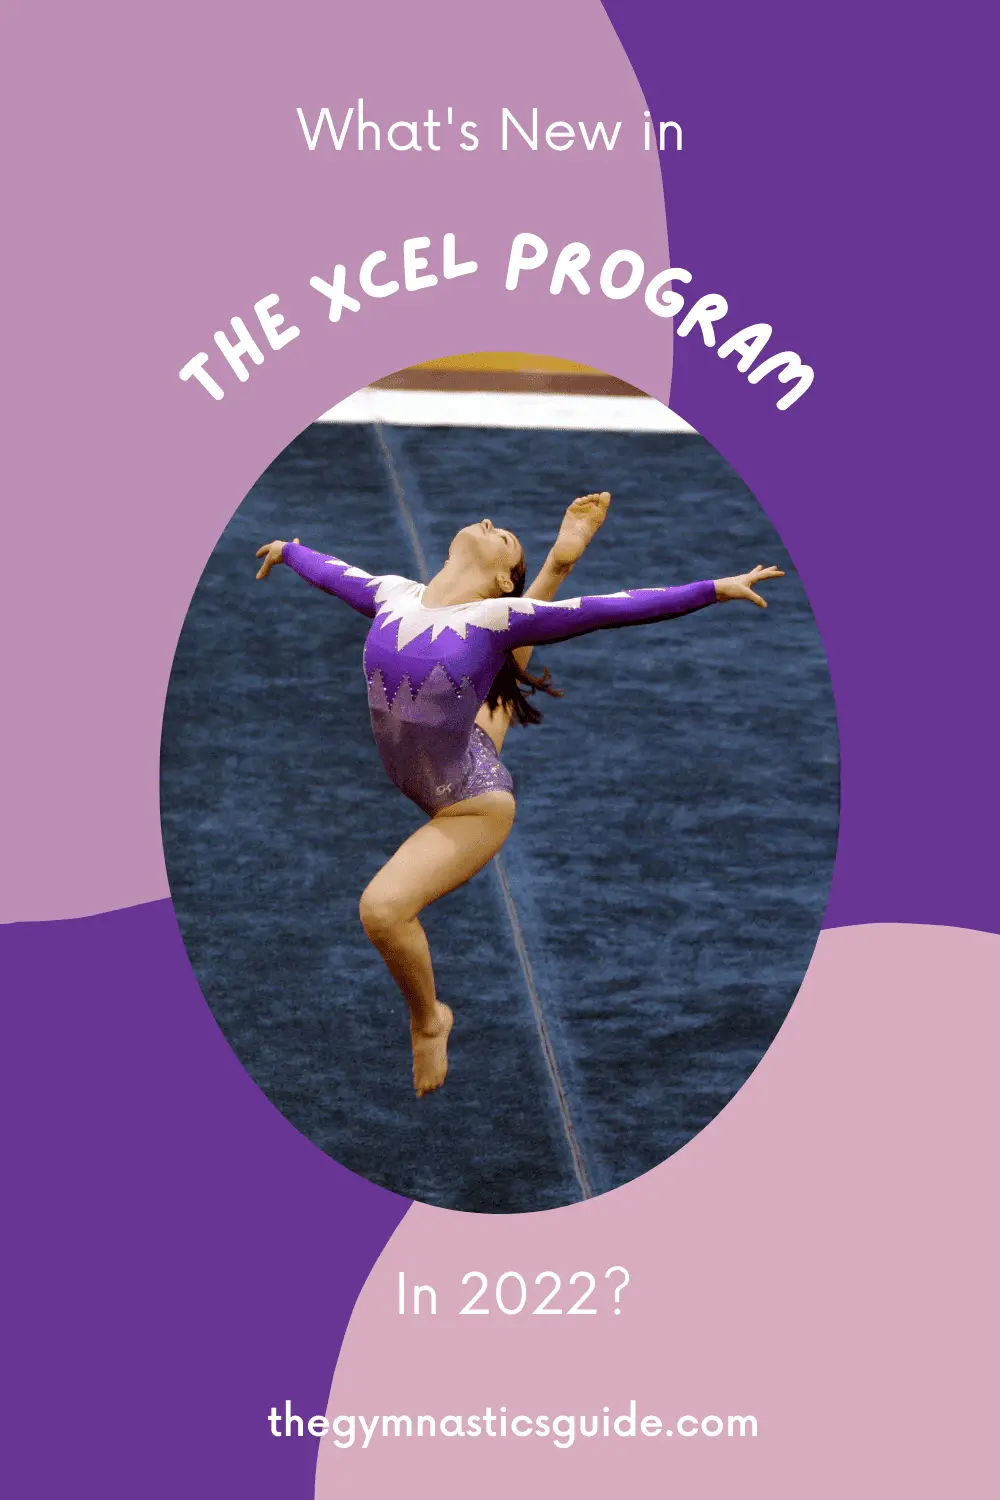 What’s New in the Xcel Program in 2022?